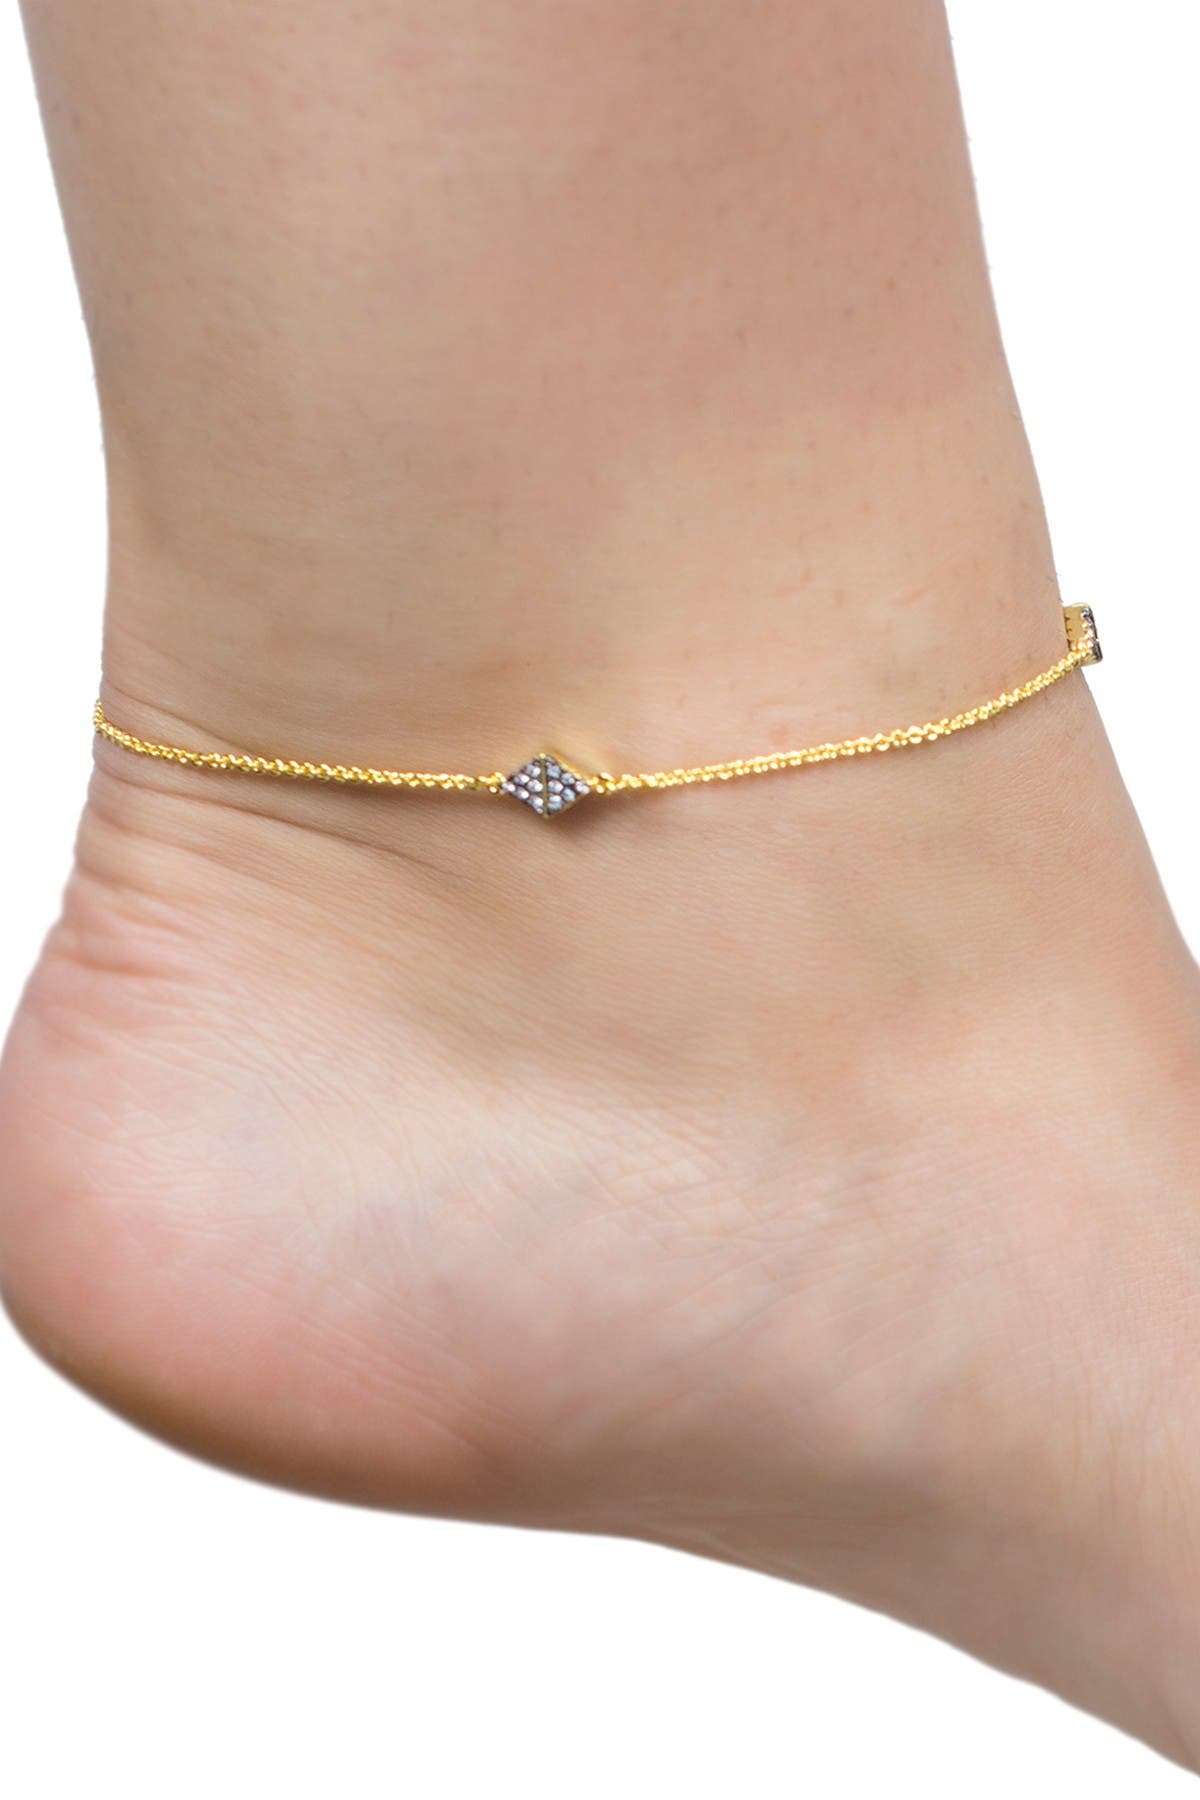 Cz By Kenneth Jay Lane Two-tone Cz Diamond Station Anklet In Open Miscellaneous